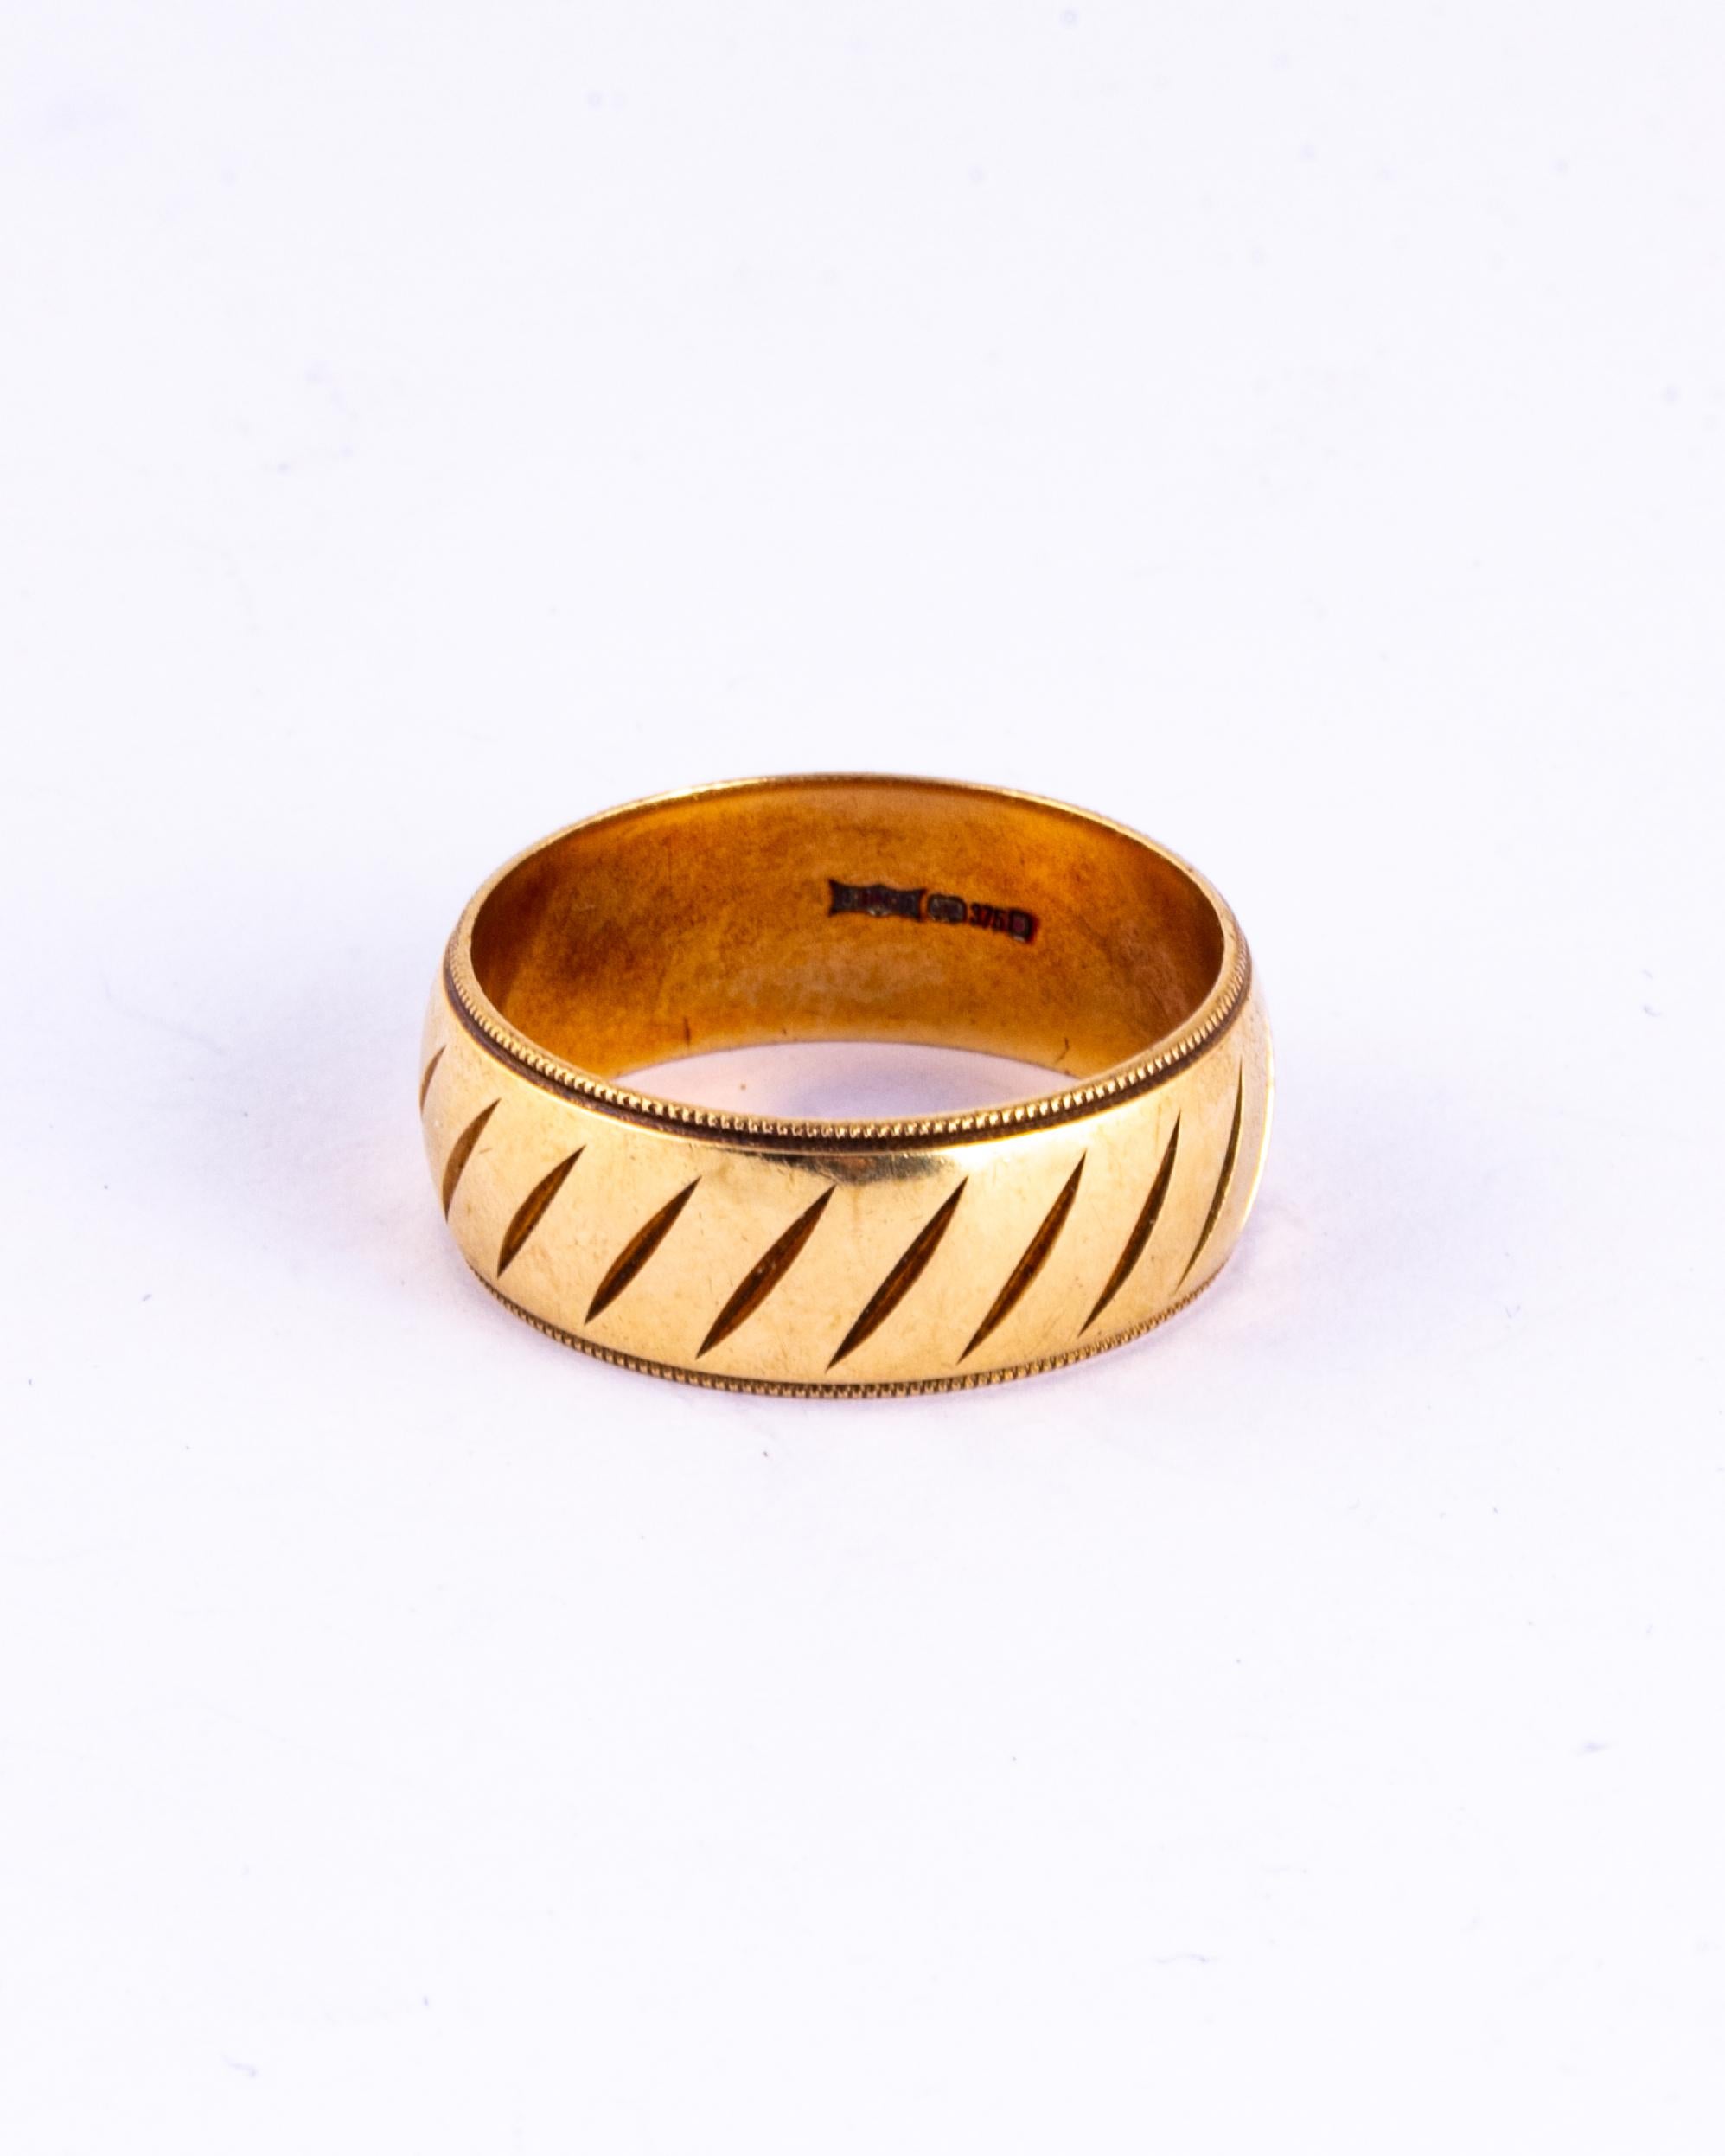 The design engraved beautifully into this 9ct gold band is full of detail. This would make a great fancy wedding band or an ornate everyday ring. Made in London, England.

Size: Y or 12 
Band Width: 8mm

Weight: 8.2g